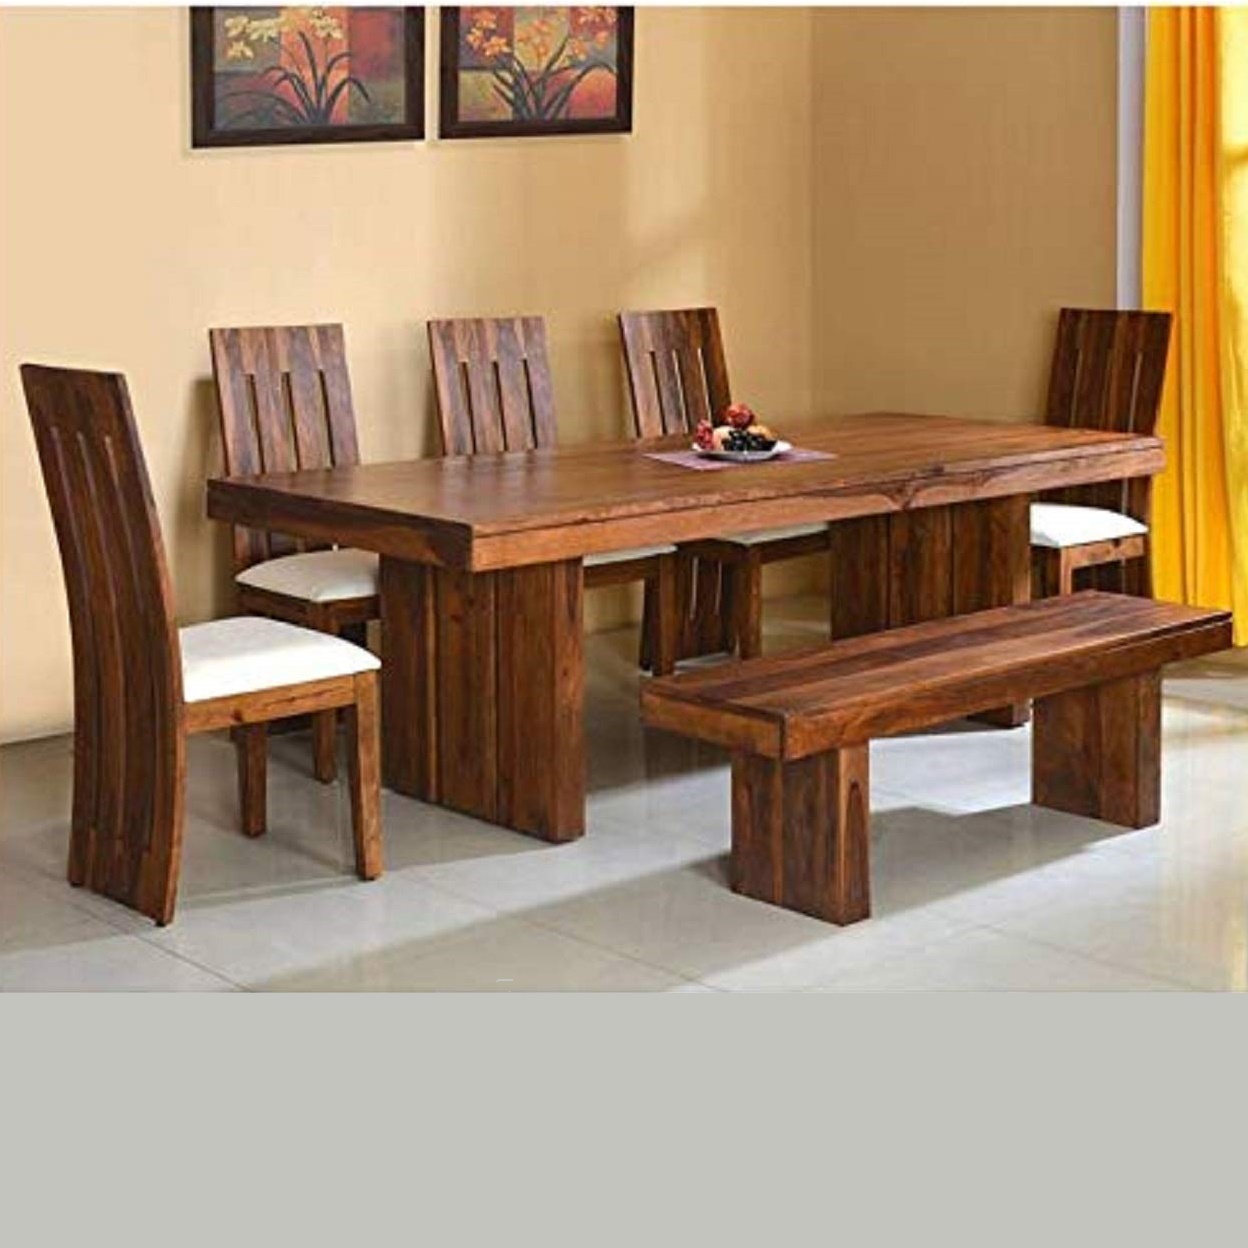 Sheesham Wood 8 Seater Dining Table Set for Home Living Room Hotel (Walnut Finish)